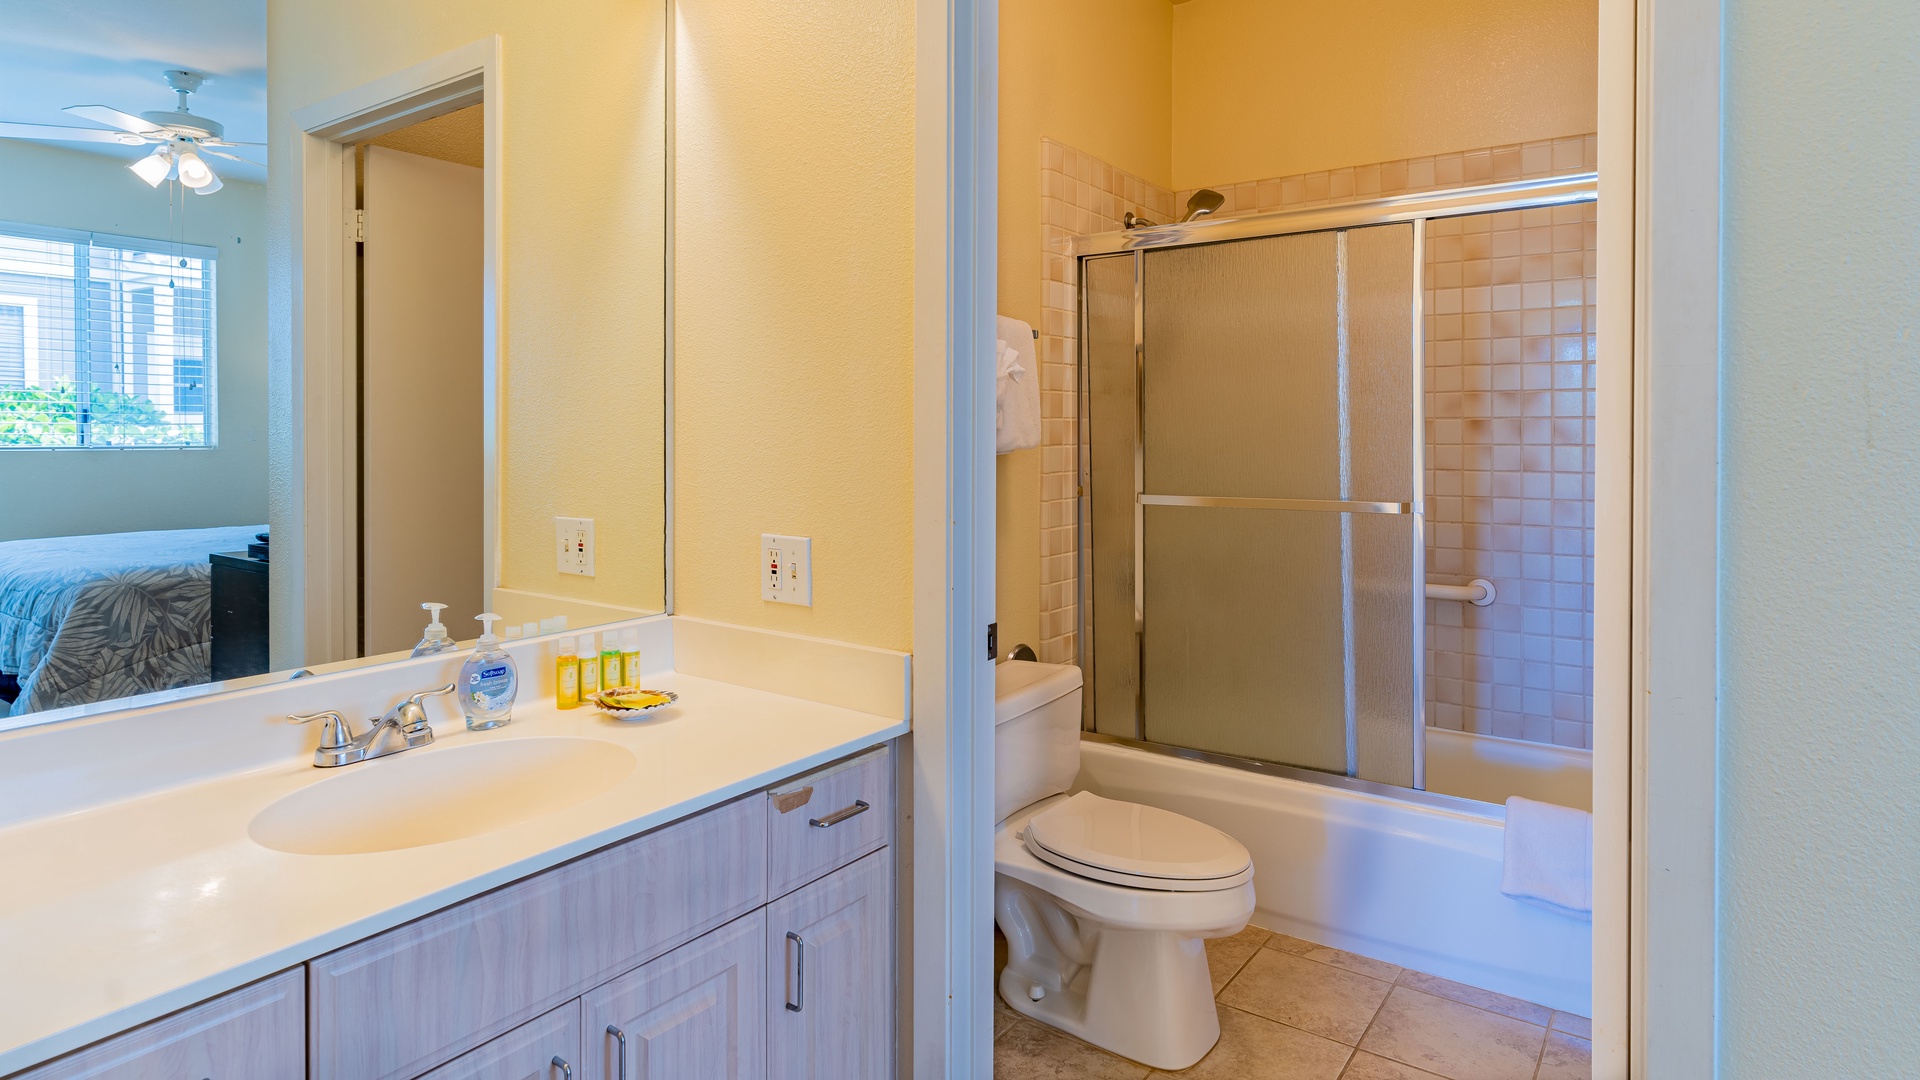 Kapolei Vacation Rentals, Fairways at Ko Olina 18C - The primary guest bathroom is a spacious full bathroom with ample lighting.